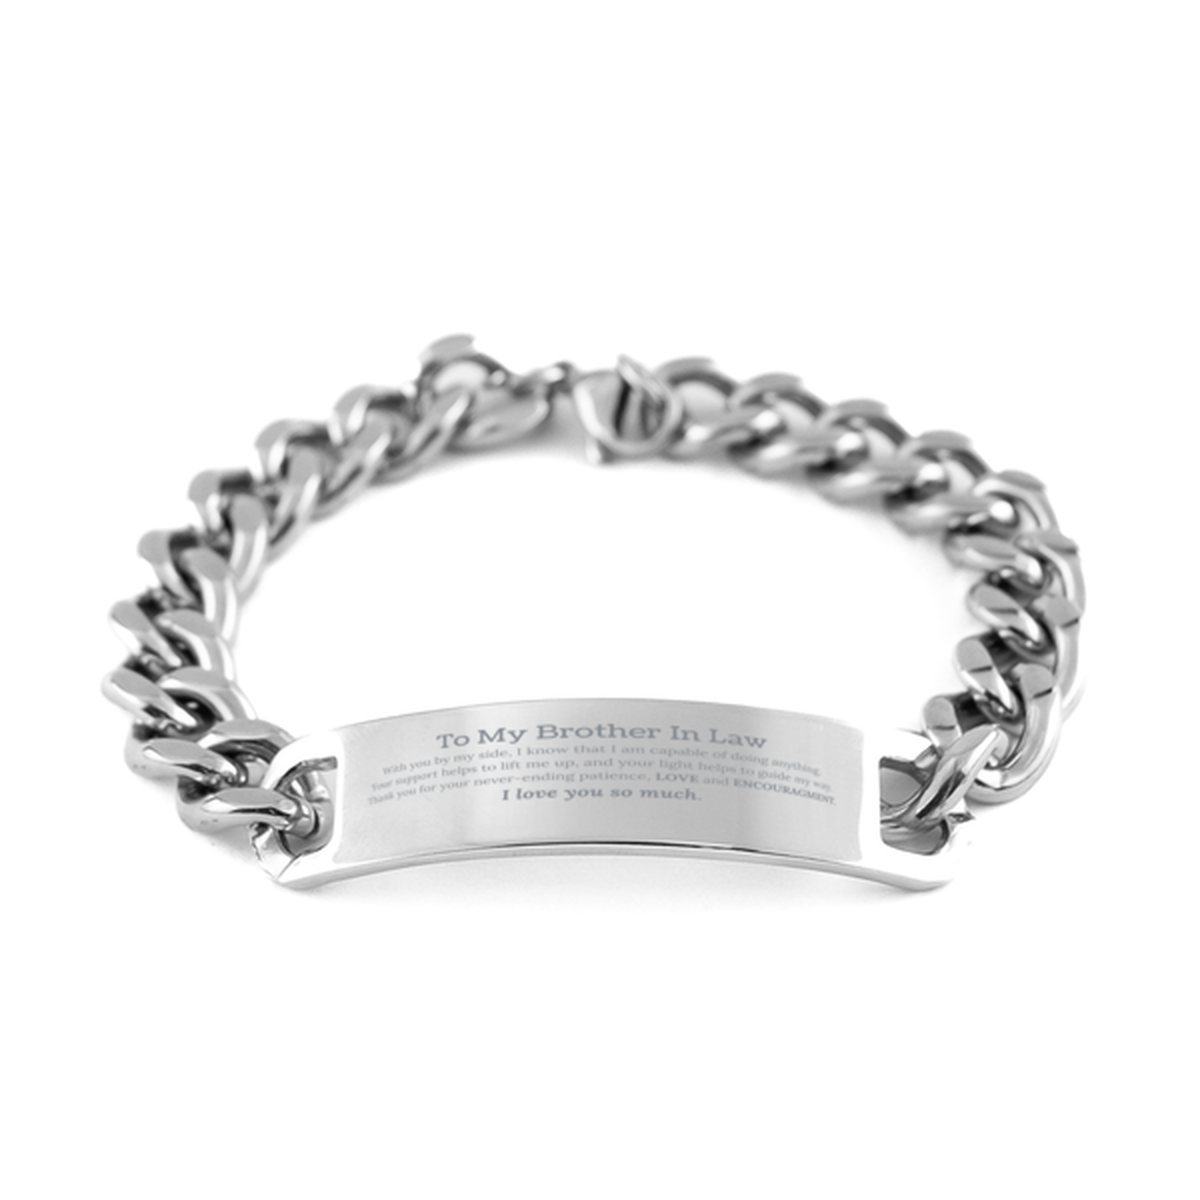 Appreciation Brother In Law Cuban Chain Stainless Steel Bracelet Gifts, To My Brother In Law Birthday Christmas Wedding Keepsake Gifts for Brother In Law With you by my side, I know that I am capable of doing anything. I love you so much